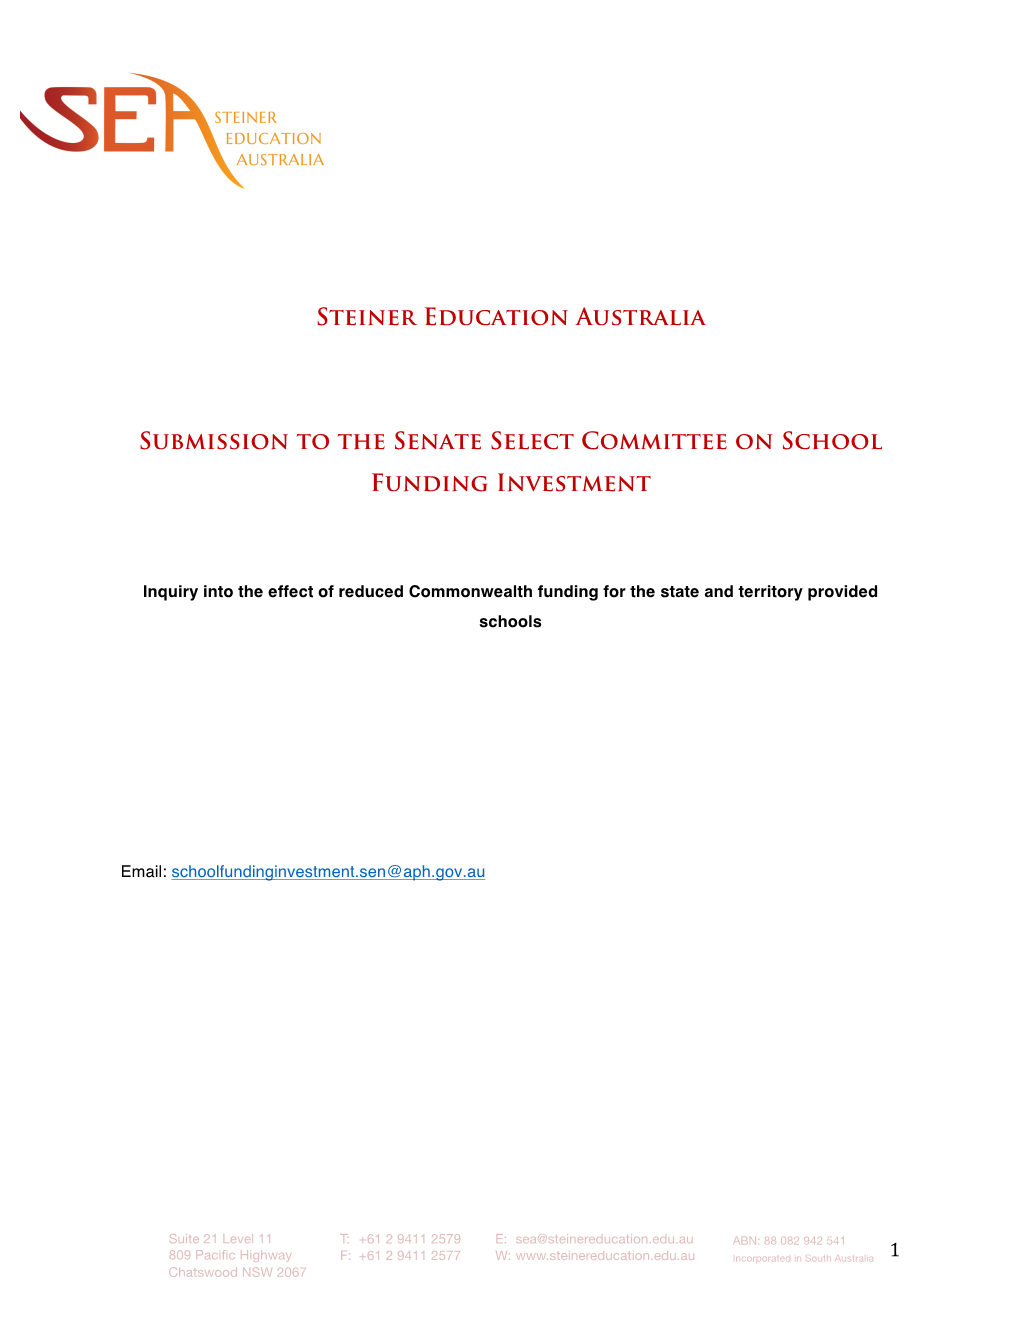 Steiner Education Australia Submission to the Senate Select